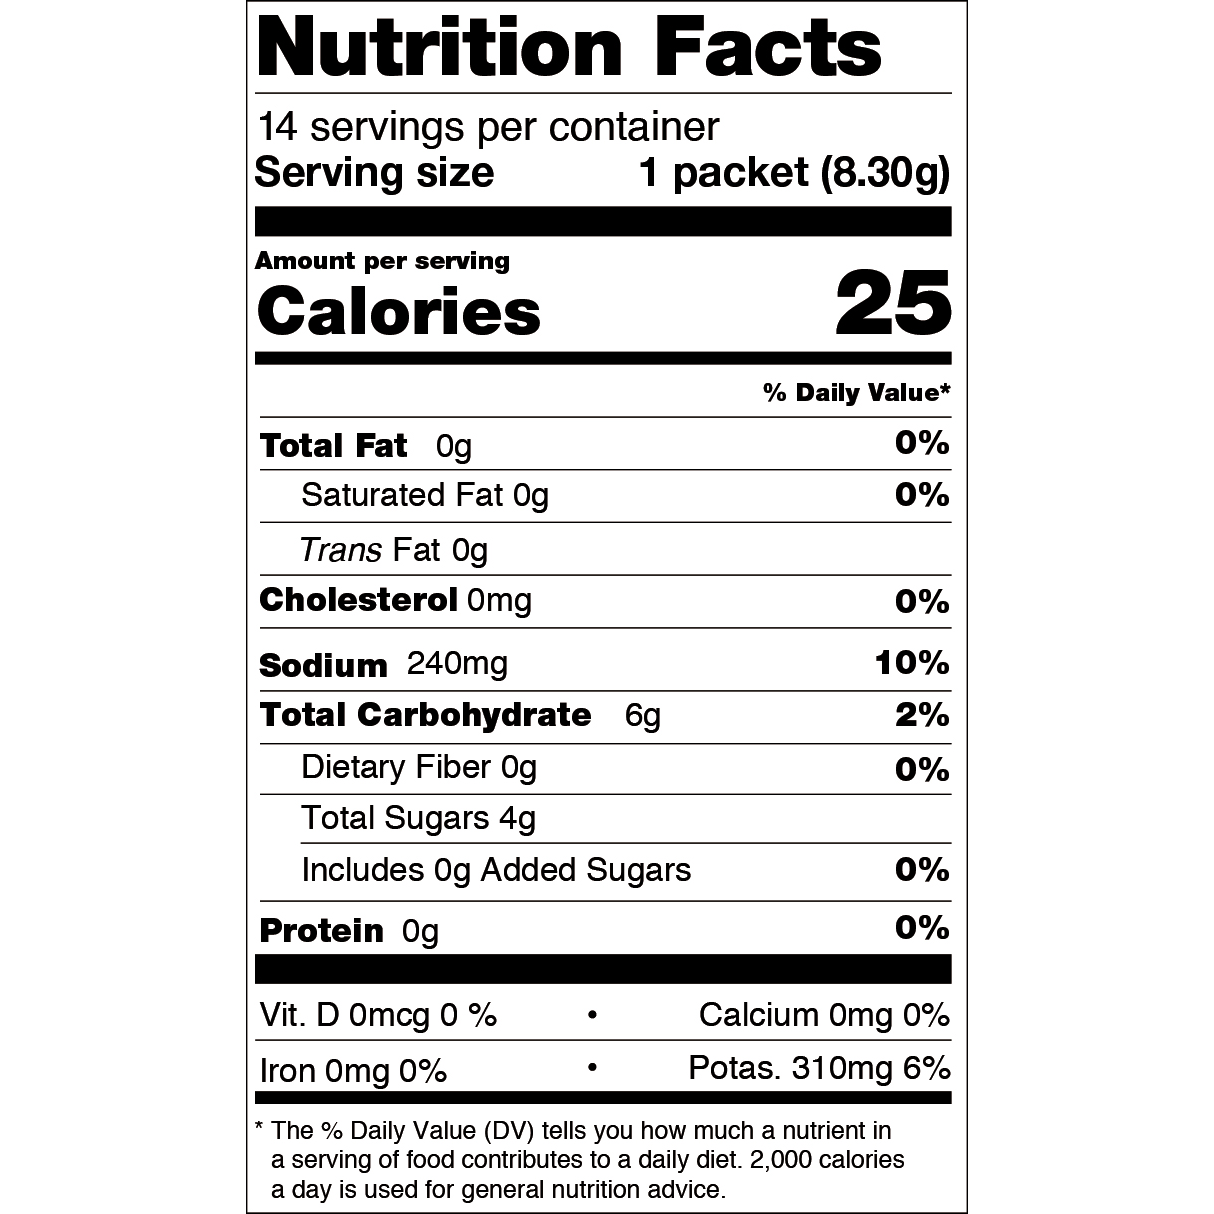 Nutrition facts for a grapefruit electrolyte mix.